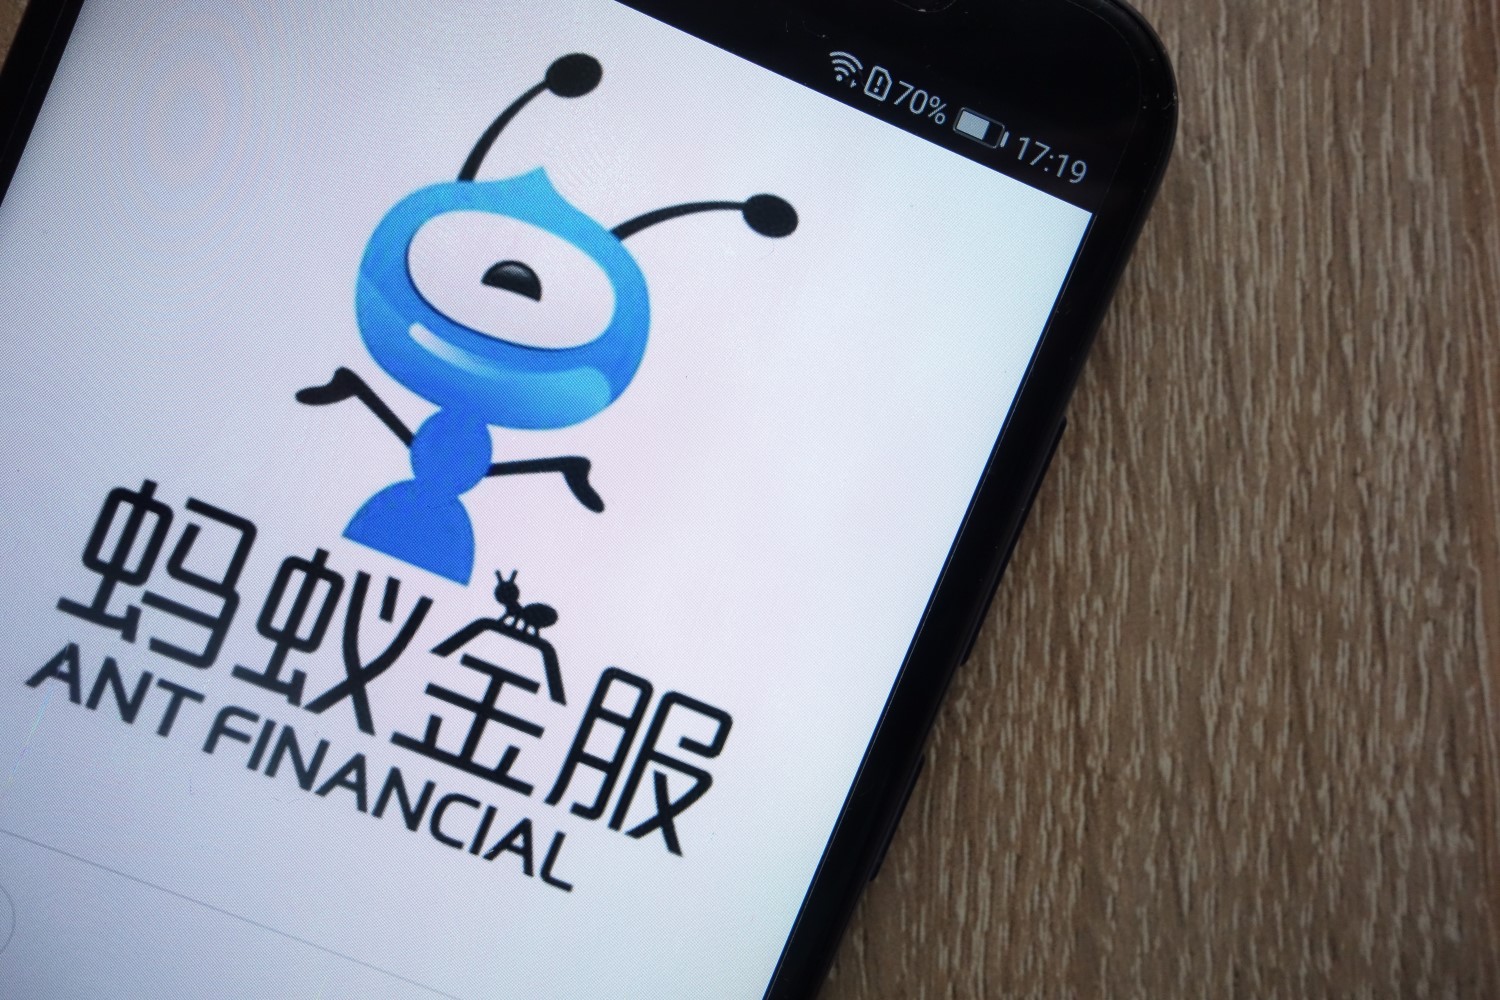 Alibaba’s Ant Financial Backs $10 Million Round For Blockchain Privacy Startup